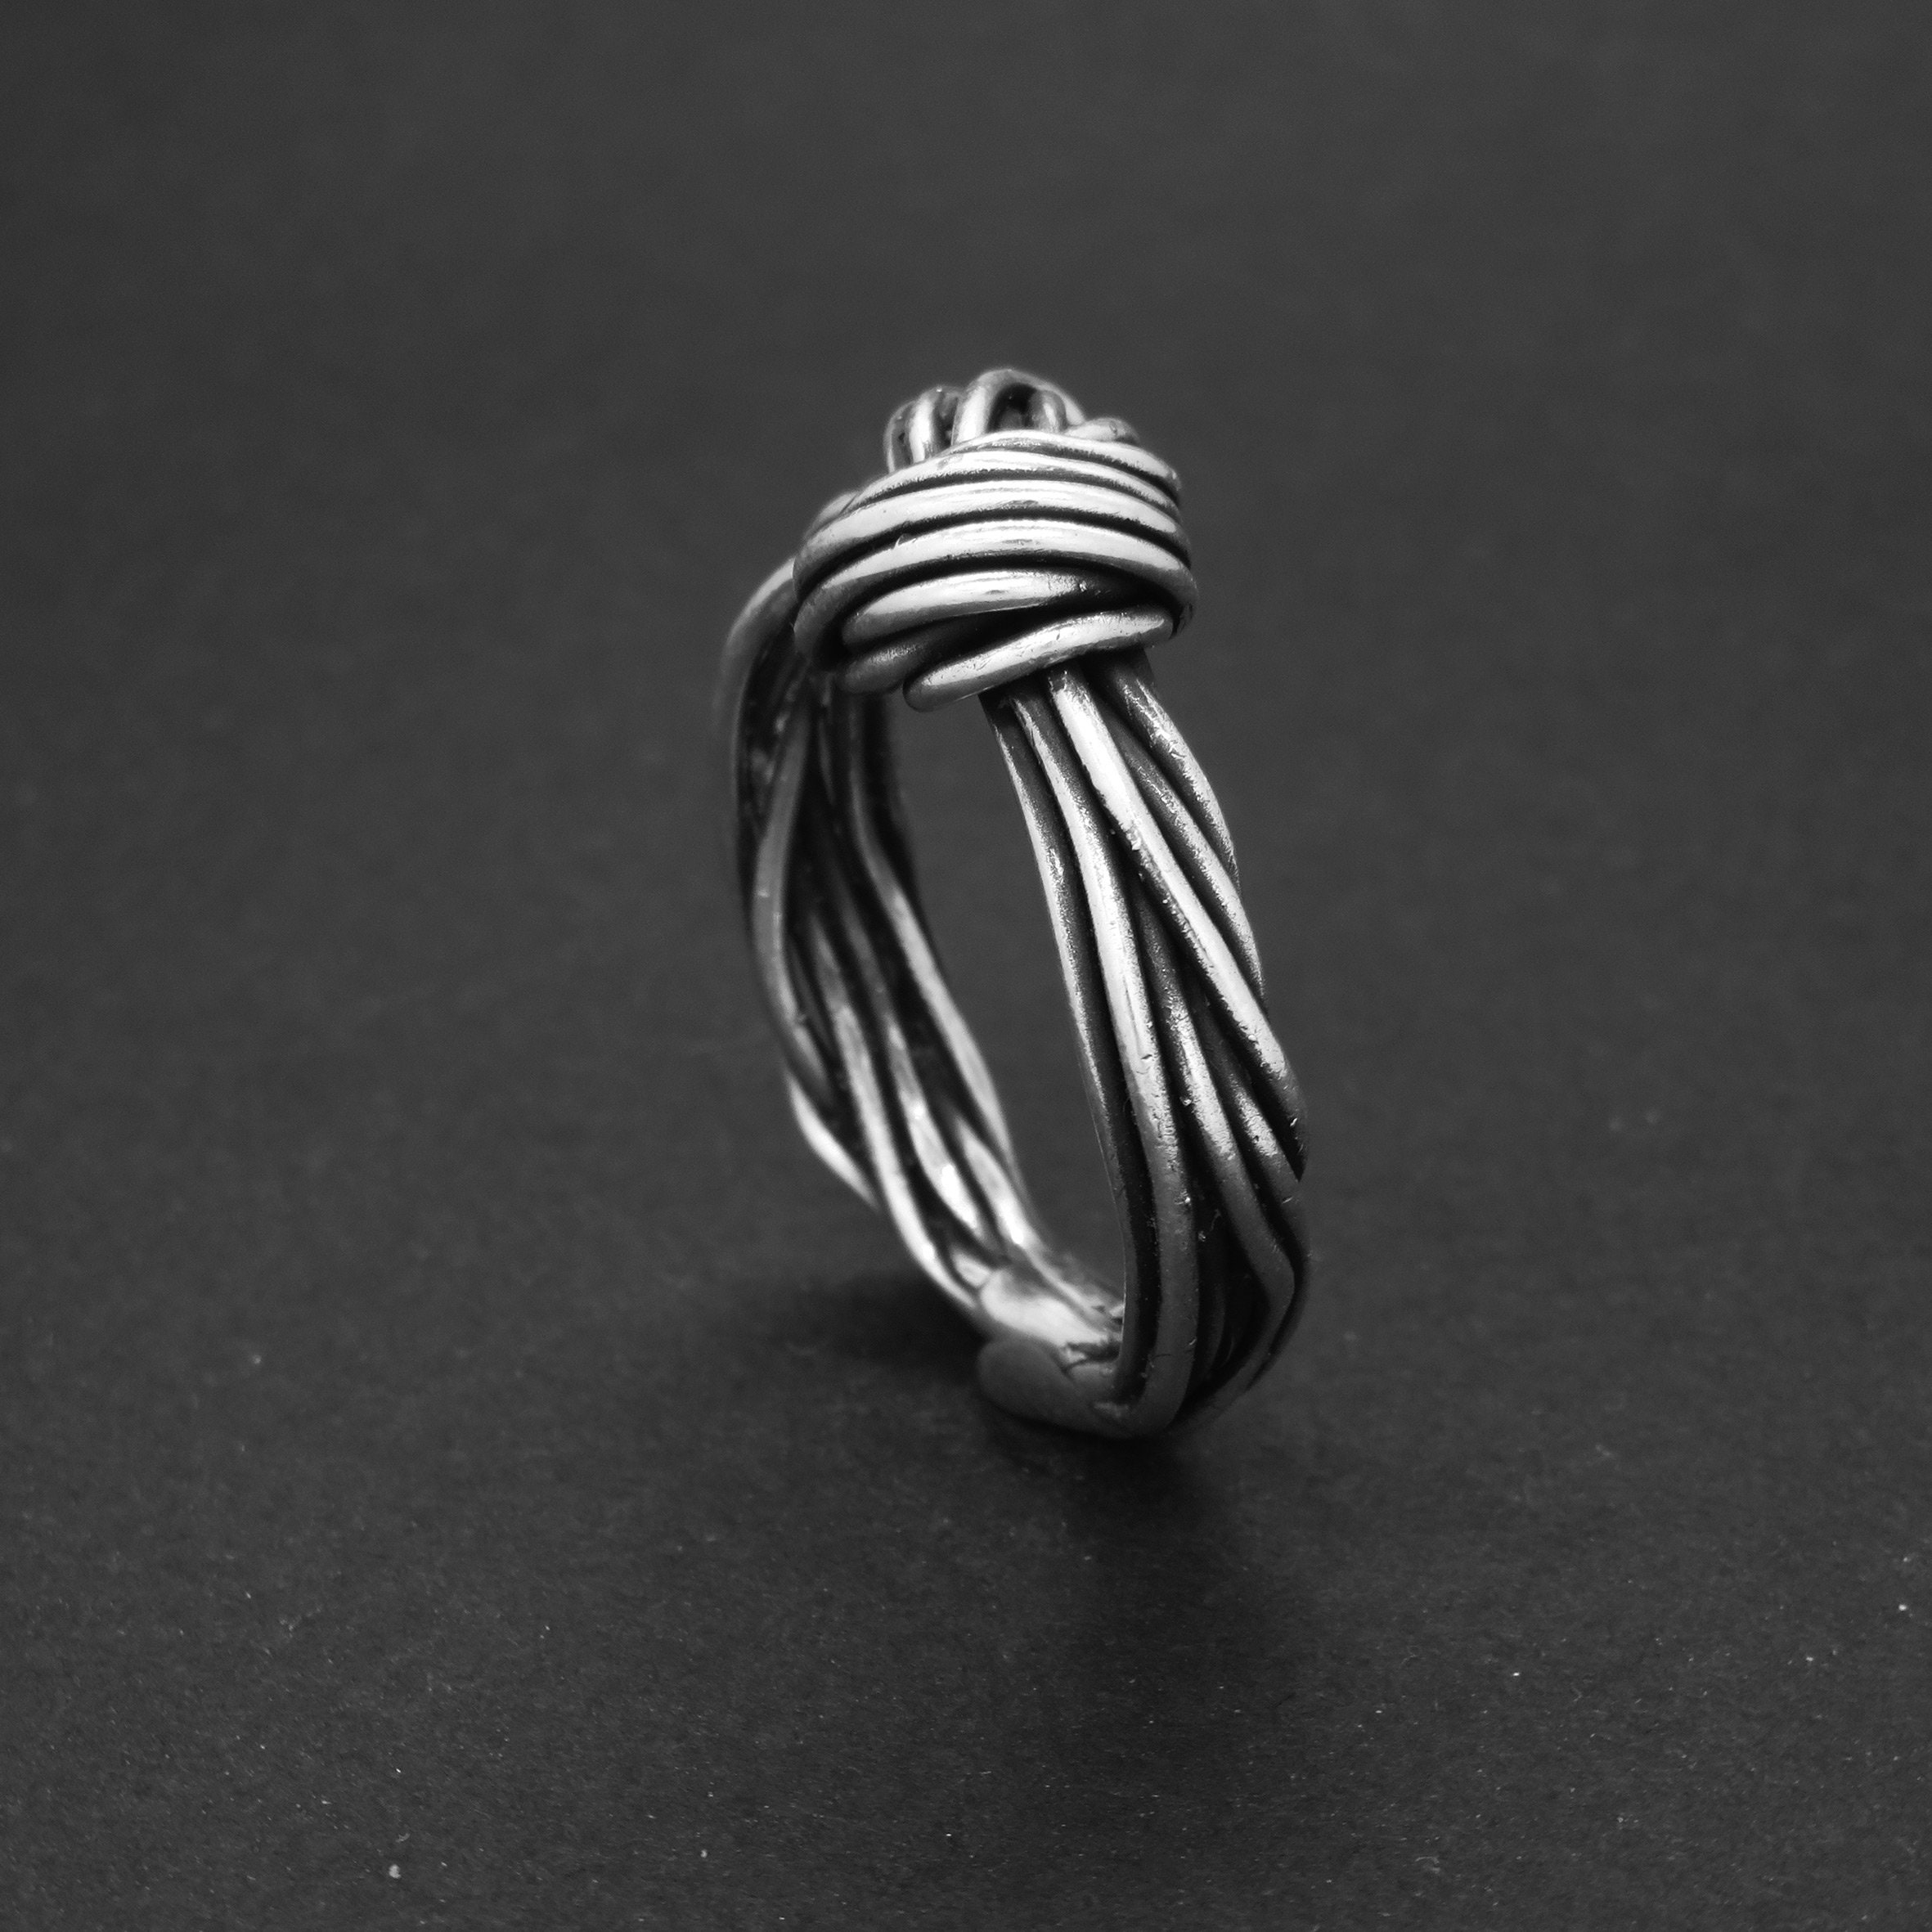 Knotted Rope Ring in Sterling Silver Tie the Knot Knotted | Etsy